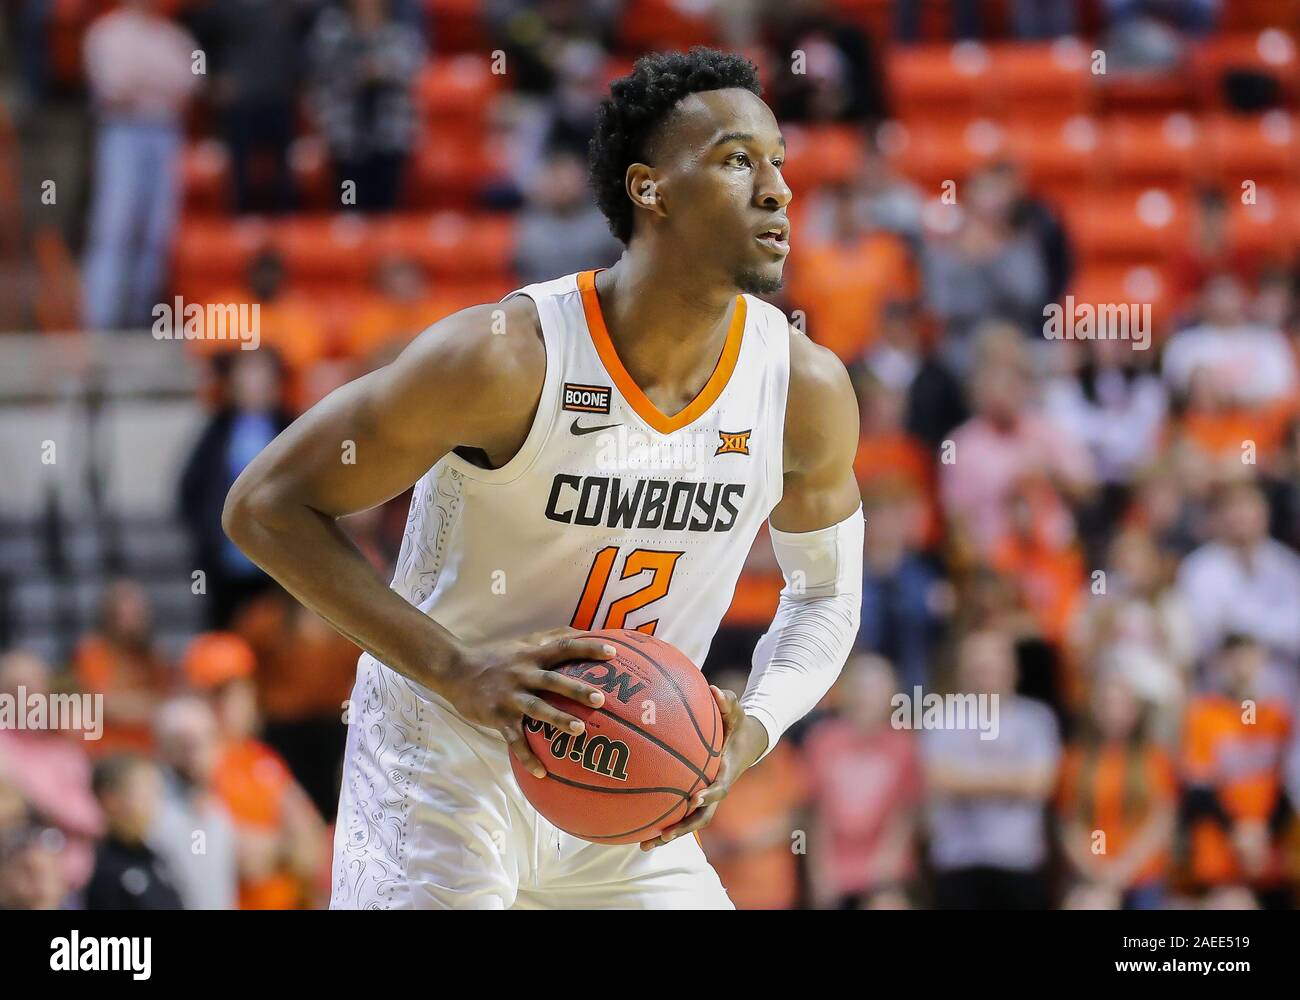 Stillwater, OK, USA. 8th Dec, 2019. Oklahoma State forward Cameron McGriff (12) with the ball during a basketball game between the Wichita State Shockers and Oklahoma State Cowboys at Gallagher-Iba Arena in Stillwater, OK. Gray Siegel/CSM/Alamy Live News Stock Photo